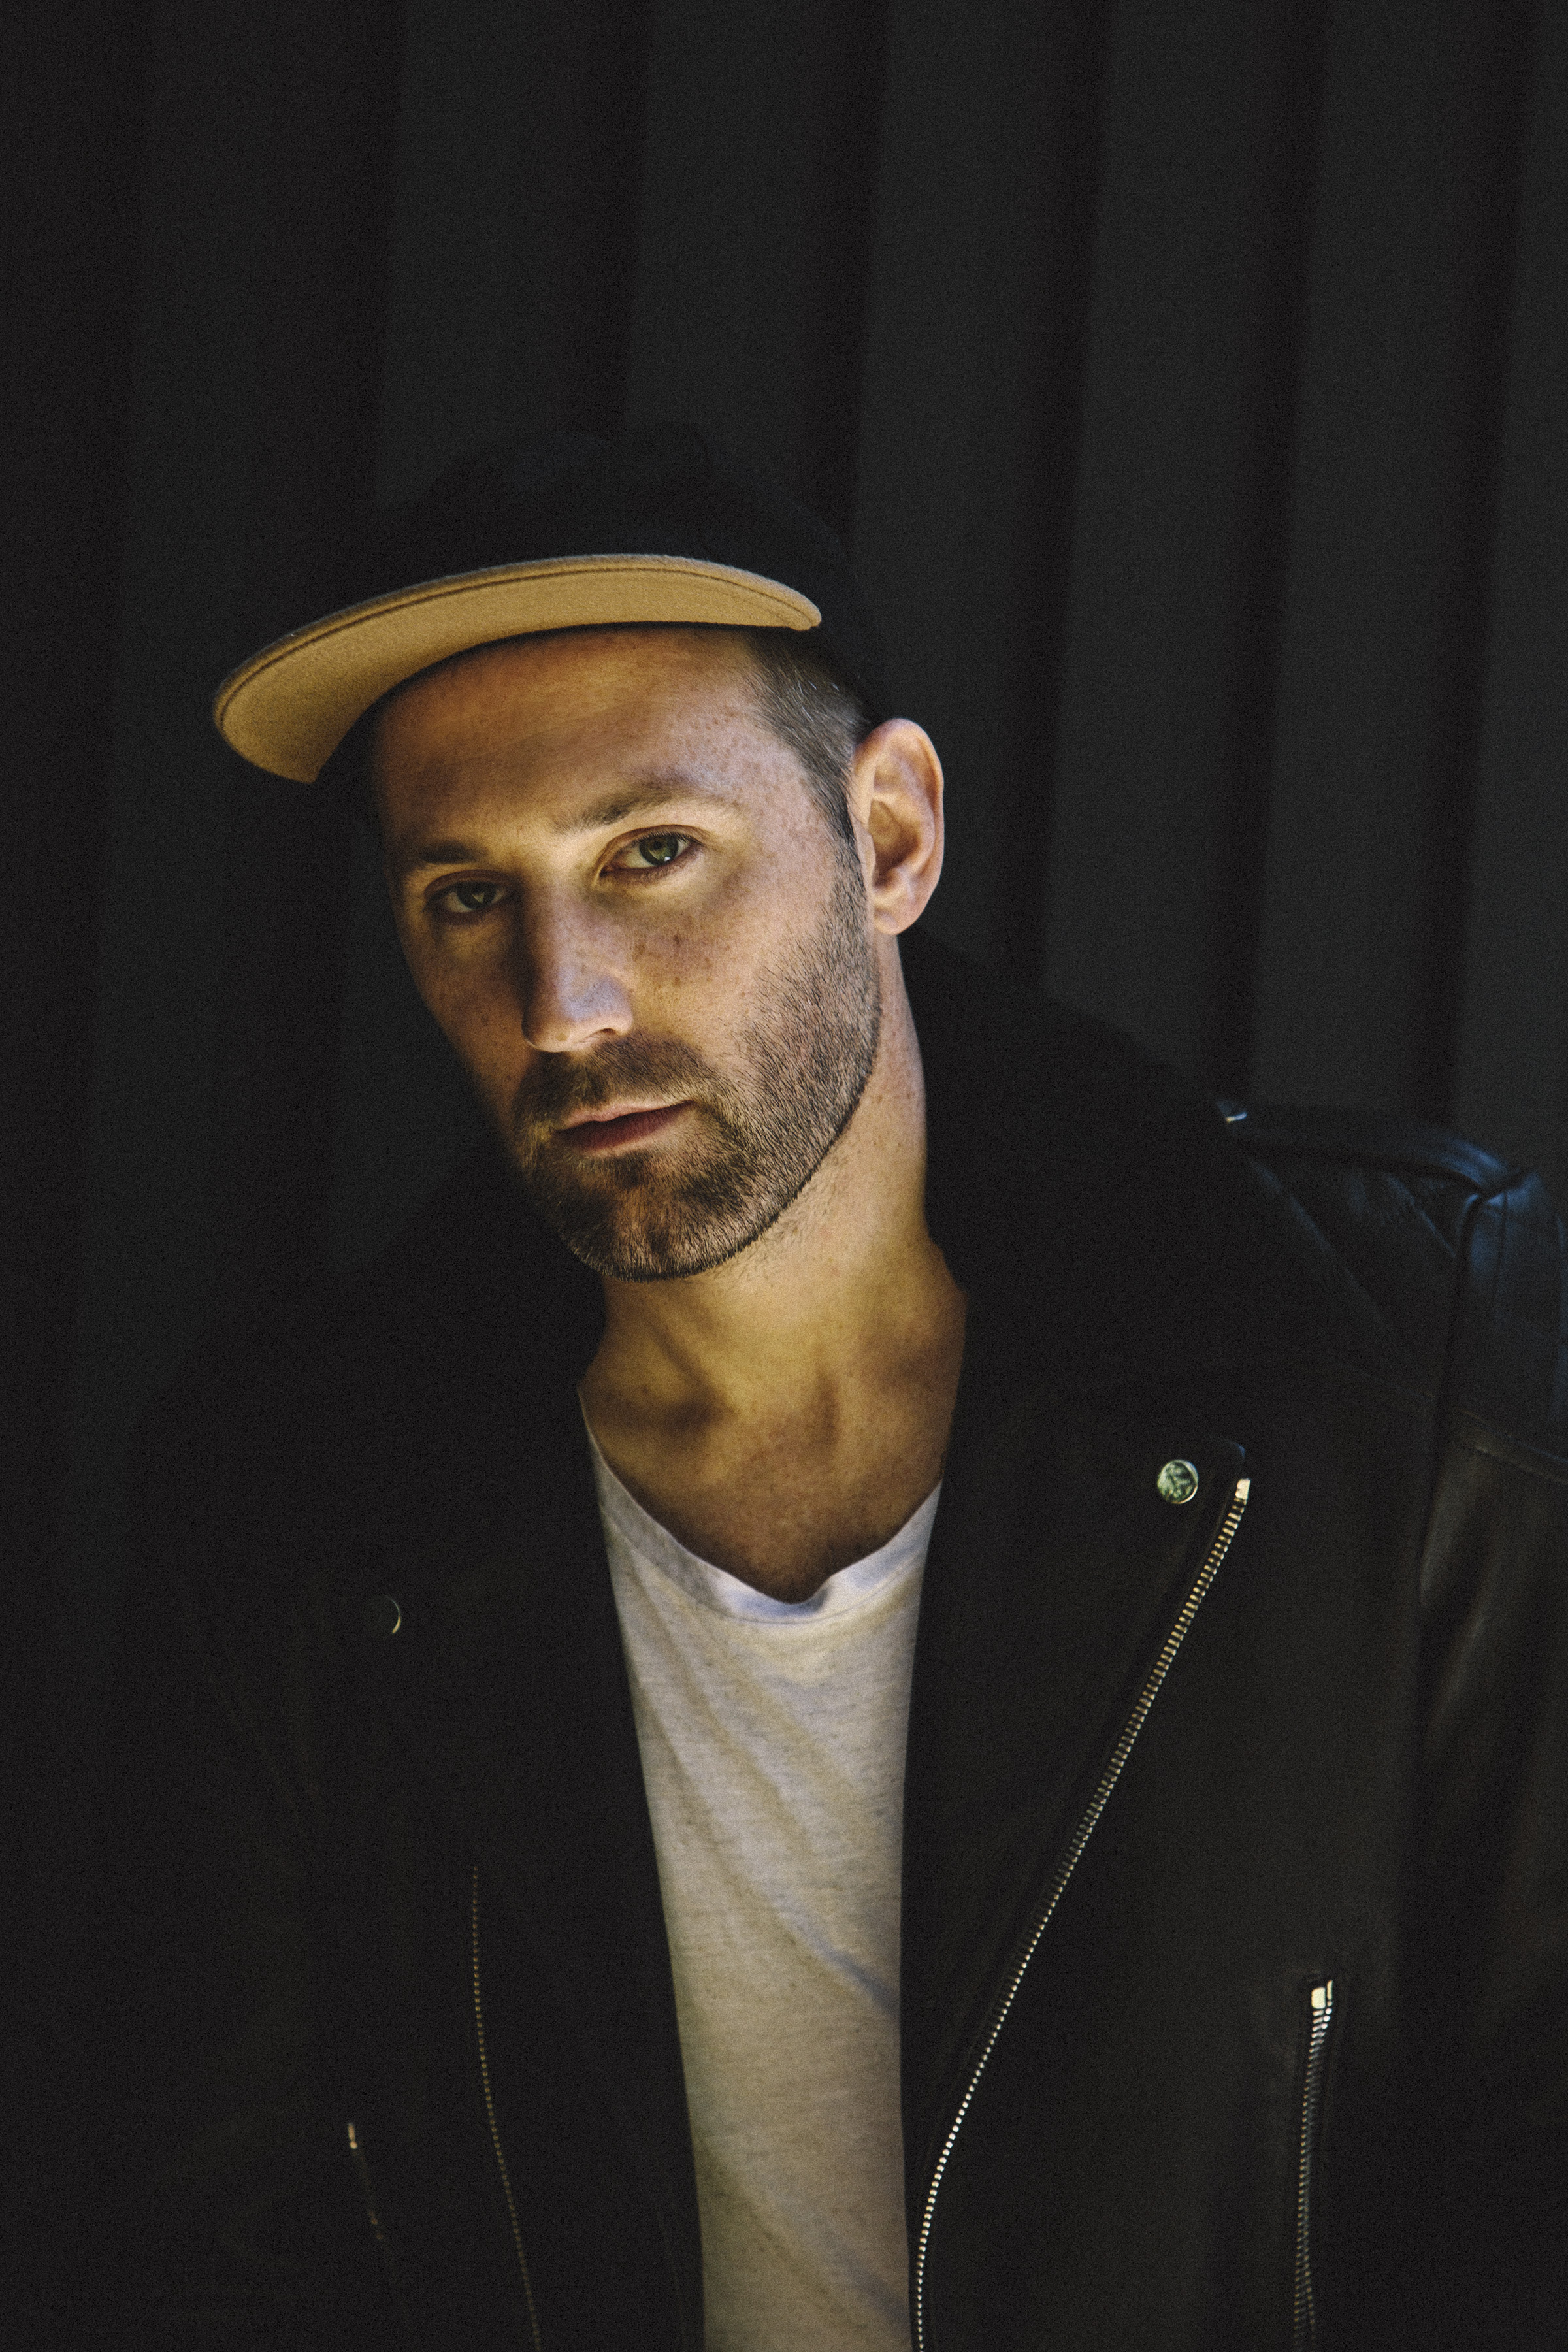 Mat Kearney will perform live at CabFest Napa Valley which is set for March 4 -6, 2016